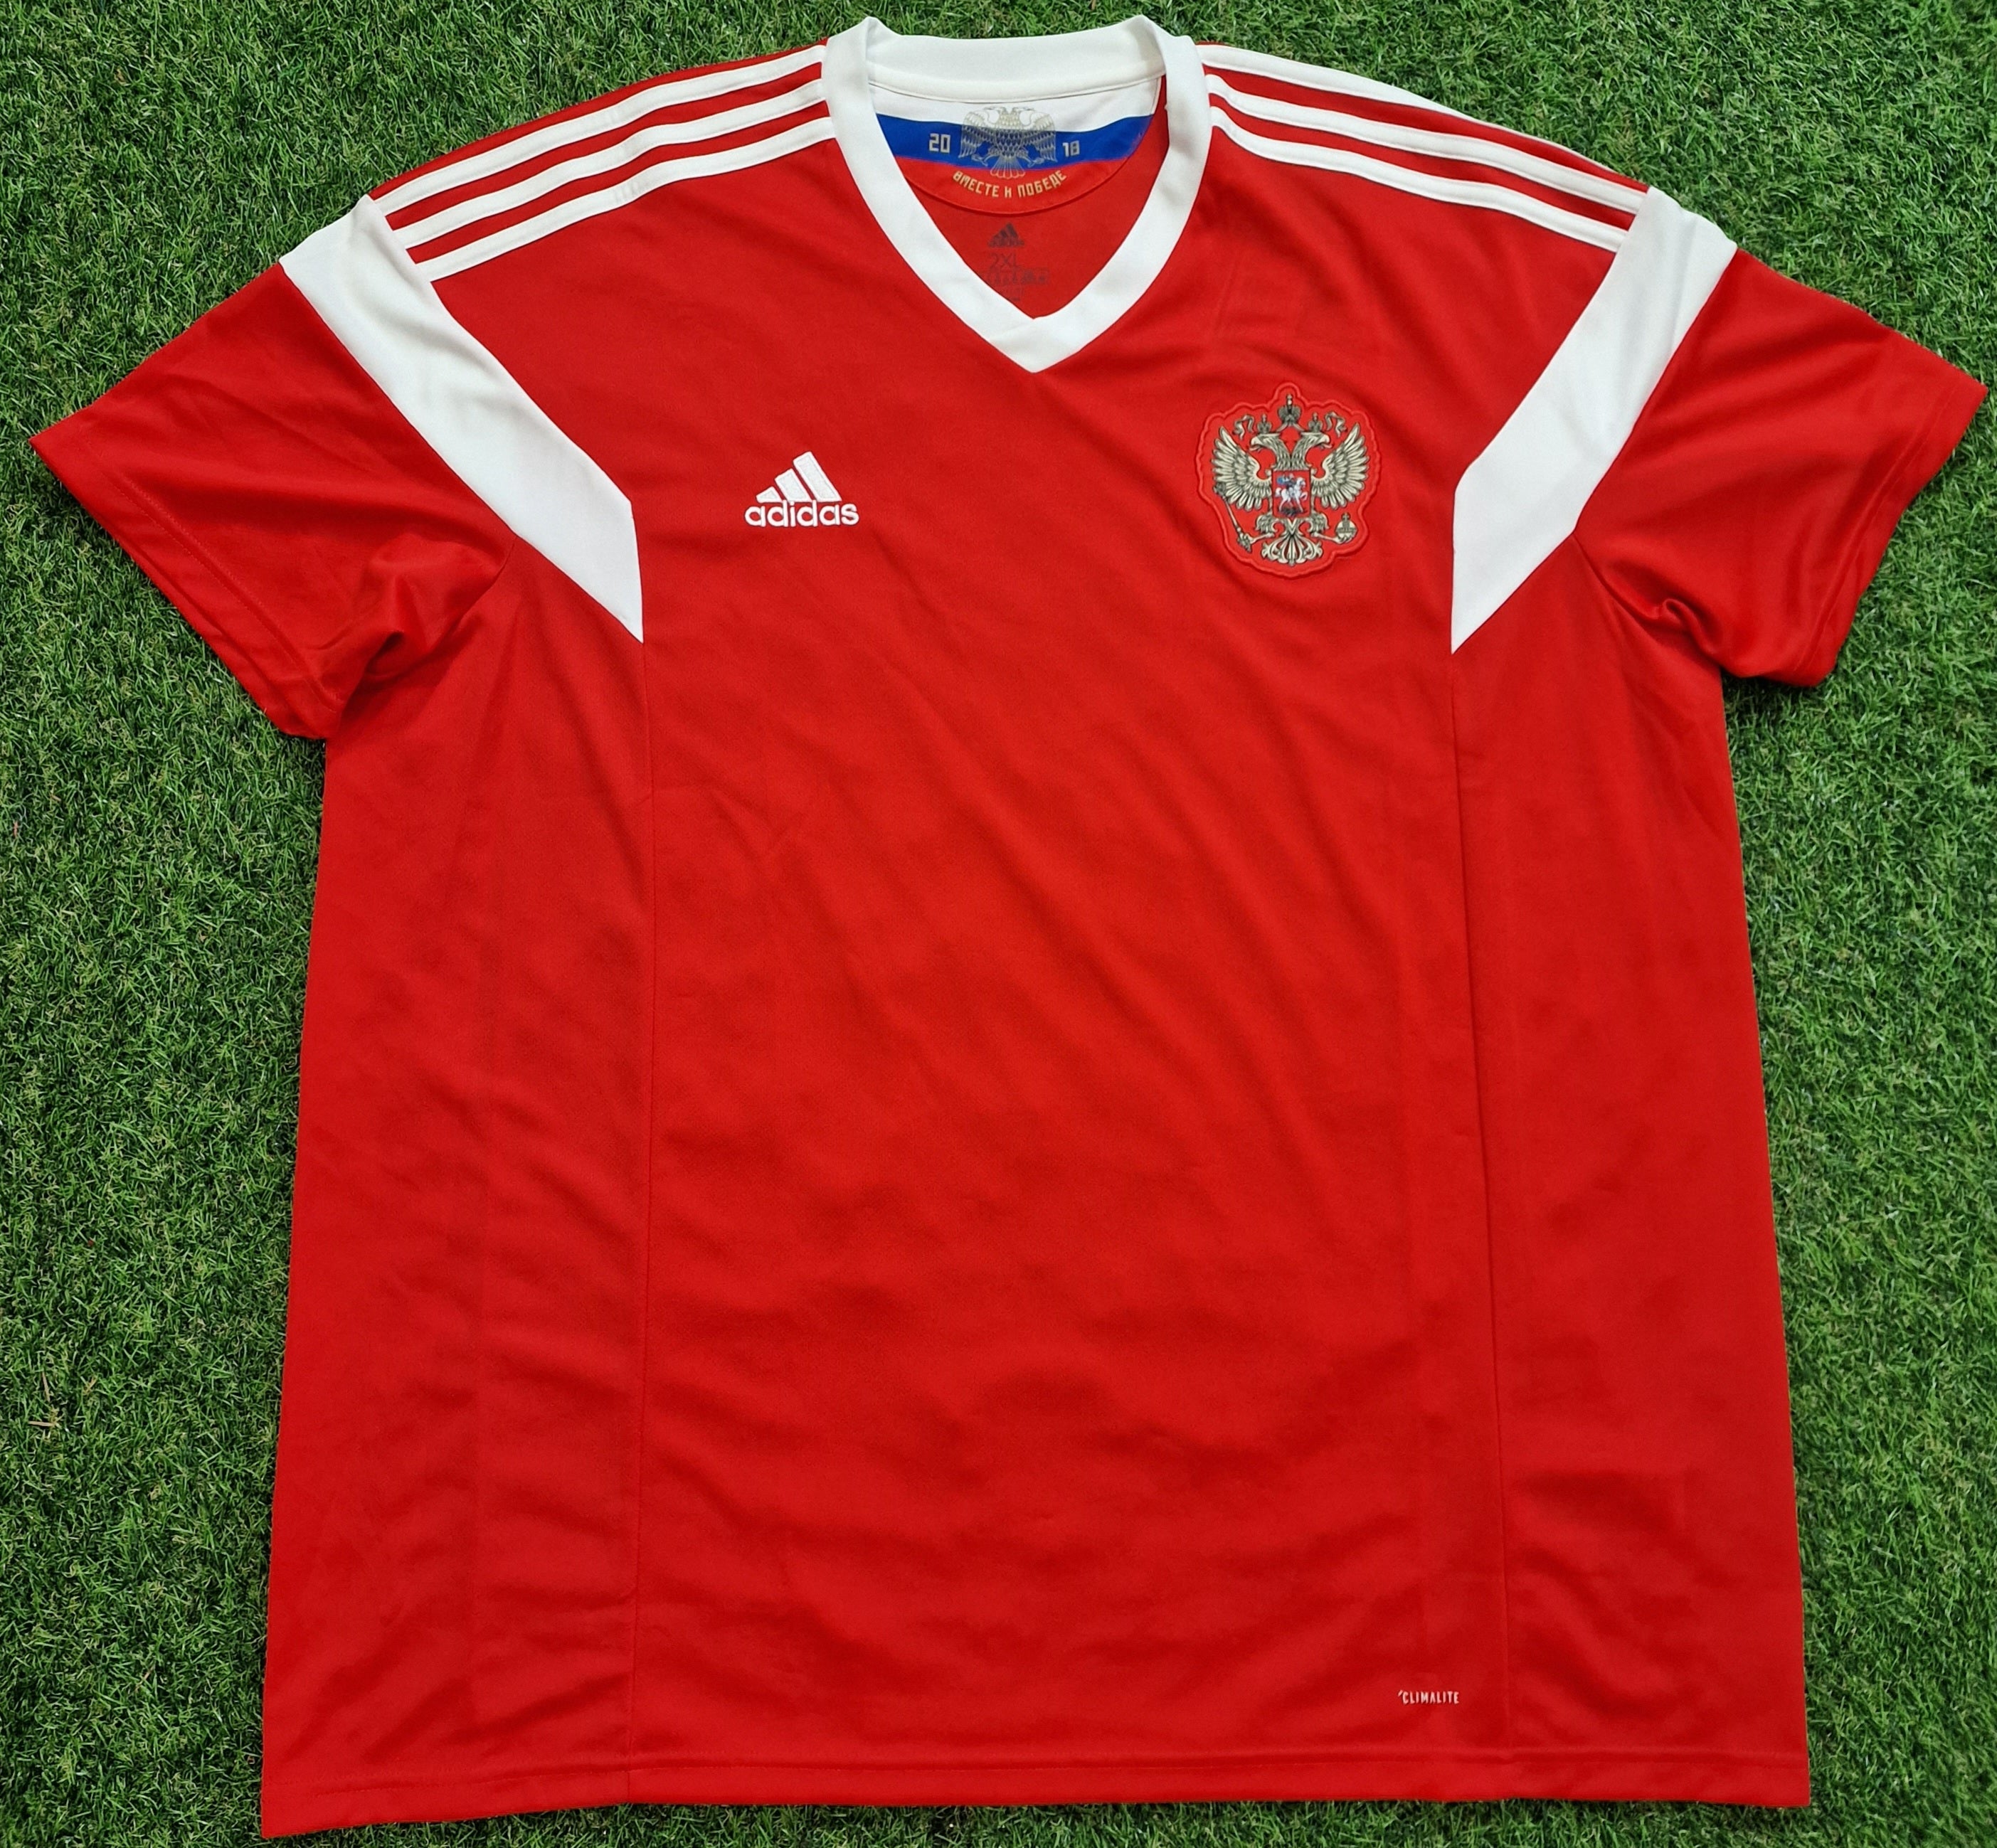 Russia 2018 World Cup Home Shirt - Size 2XL